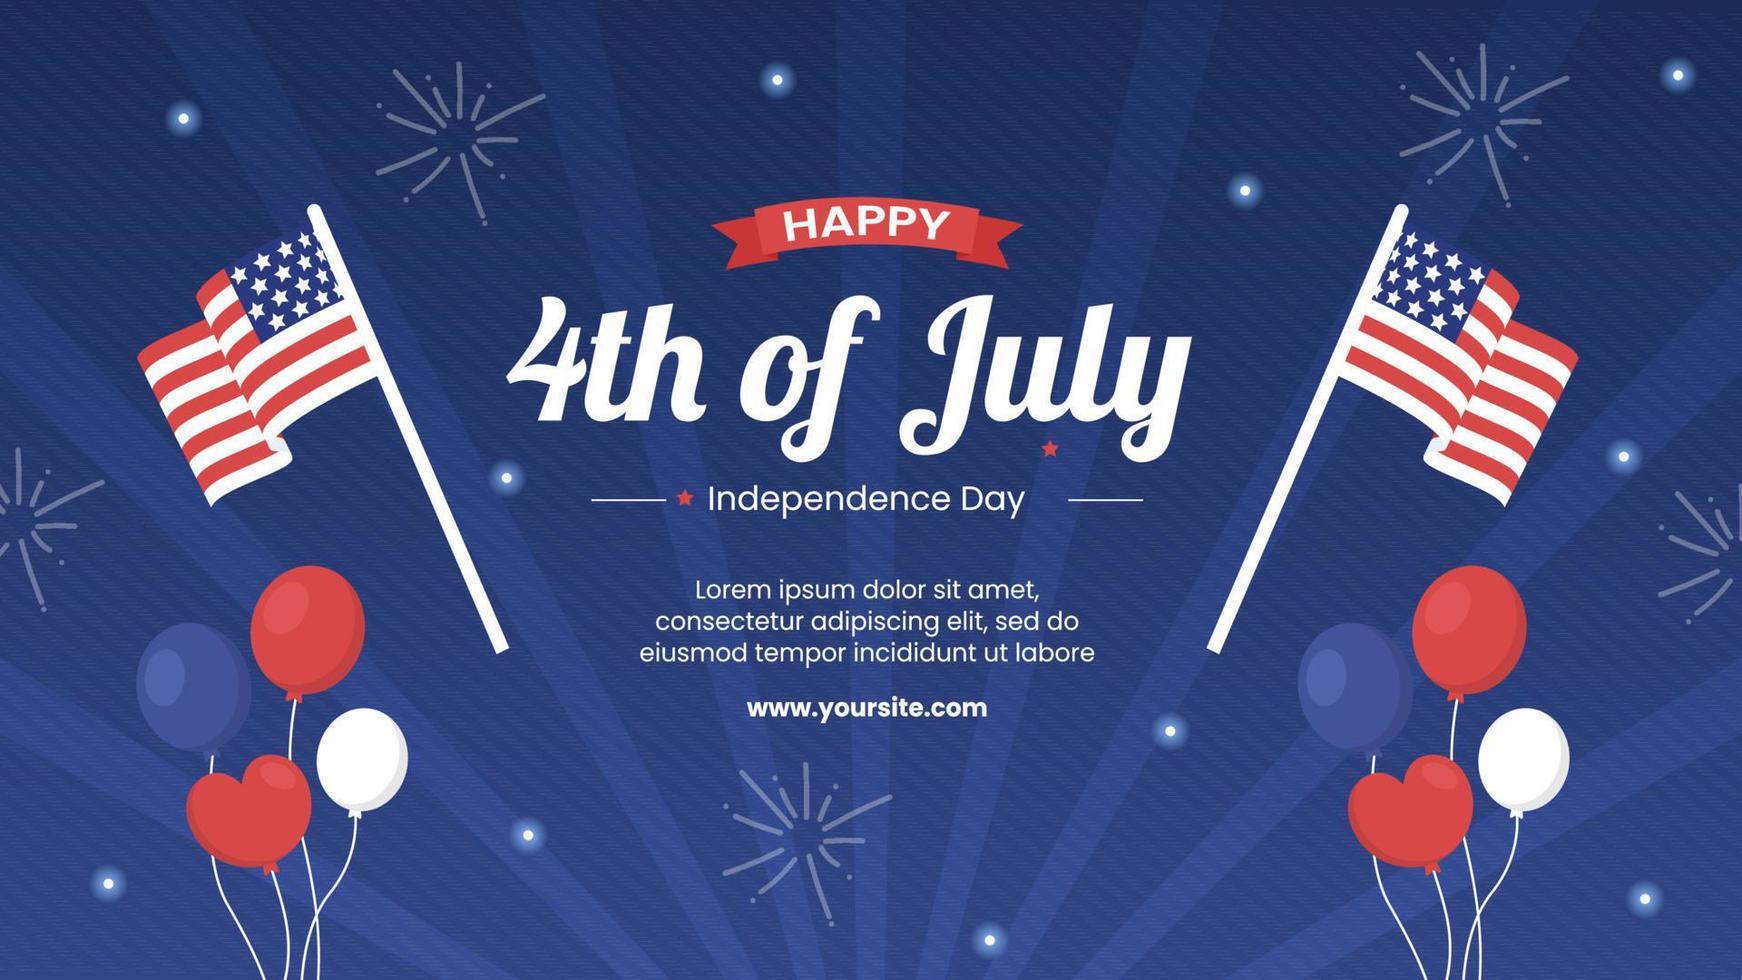 4th of July Happy Independence Day USA Vertical Social Media Template Vector Cartoon Background Illustration